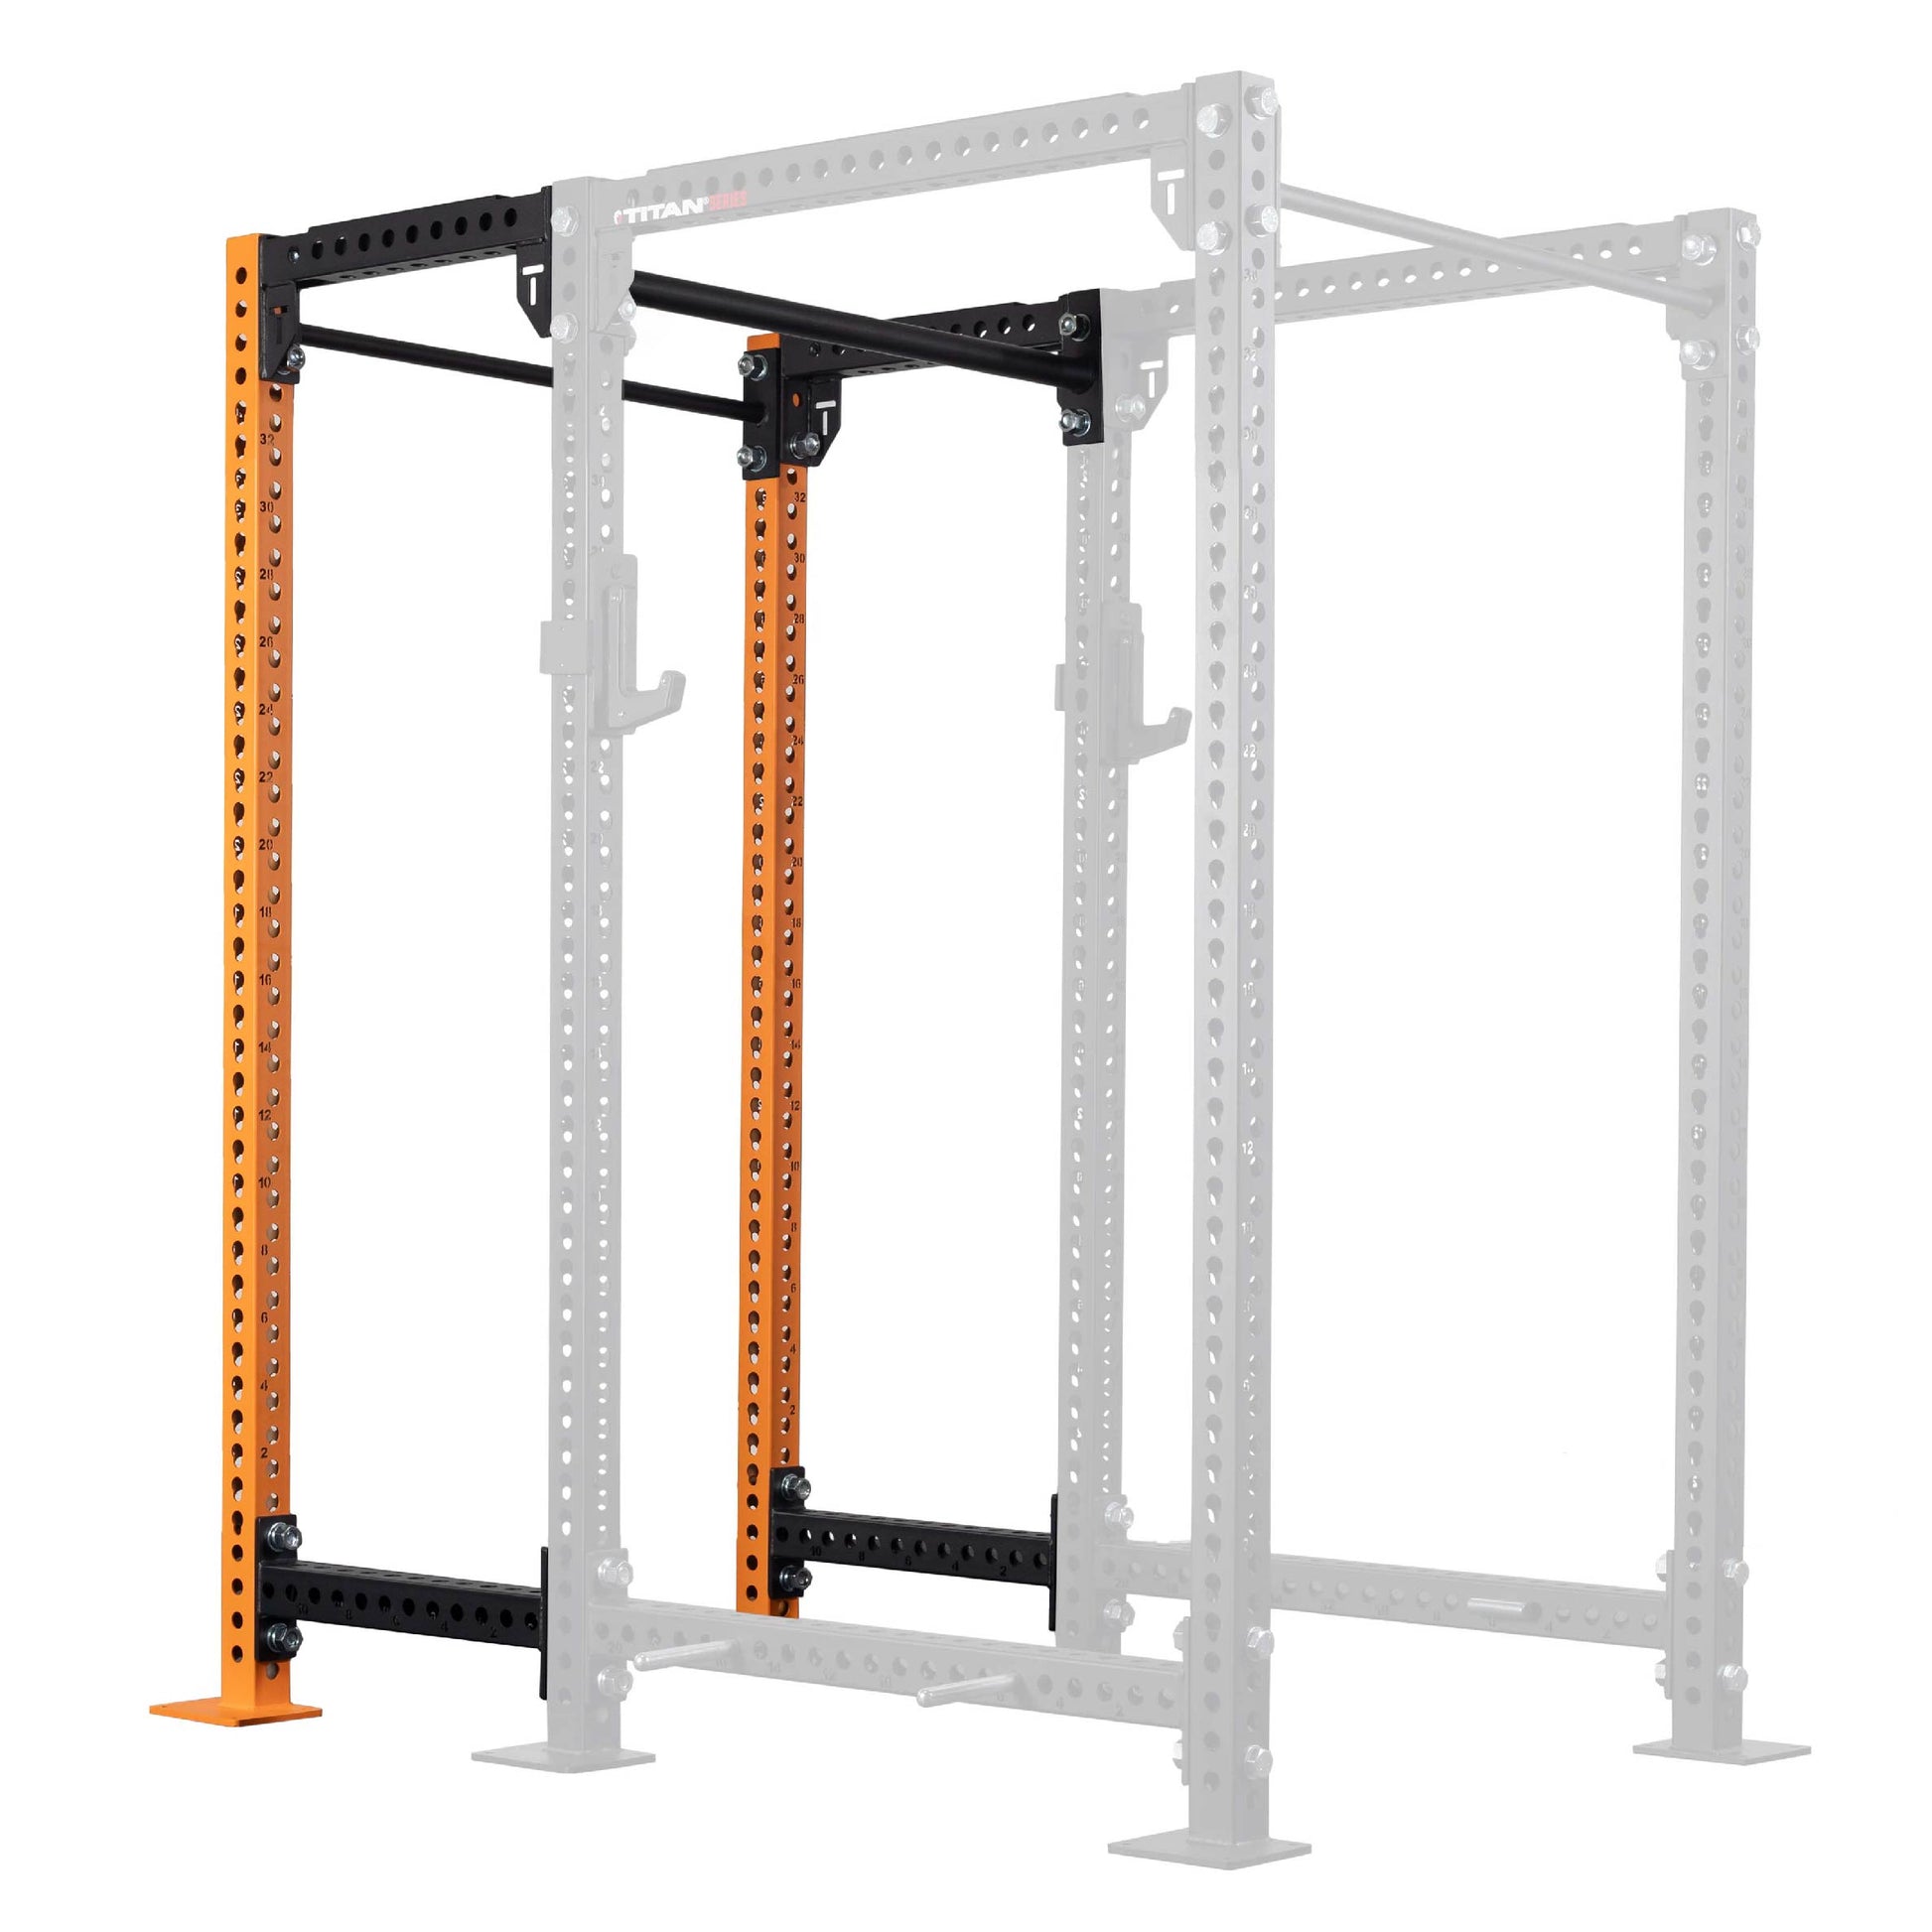 TITAN Series 24" Extension Kit - Extension Color: Orange - Extension Height: 90" - Crossmember: 1.25" Pull-Up Bar | Orange / 90" / 1.25" Pull-Up Bar